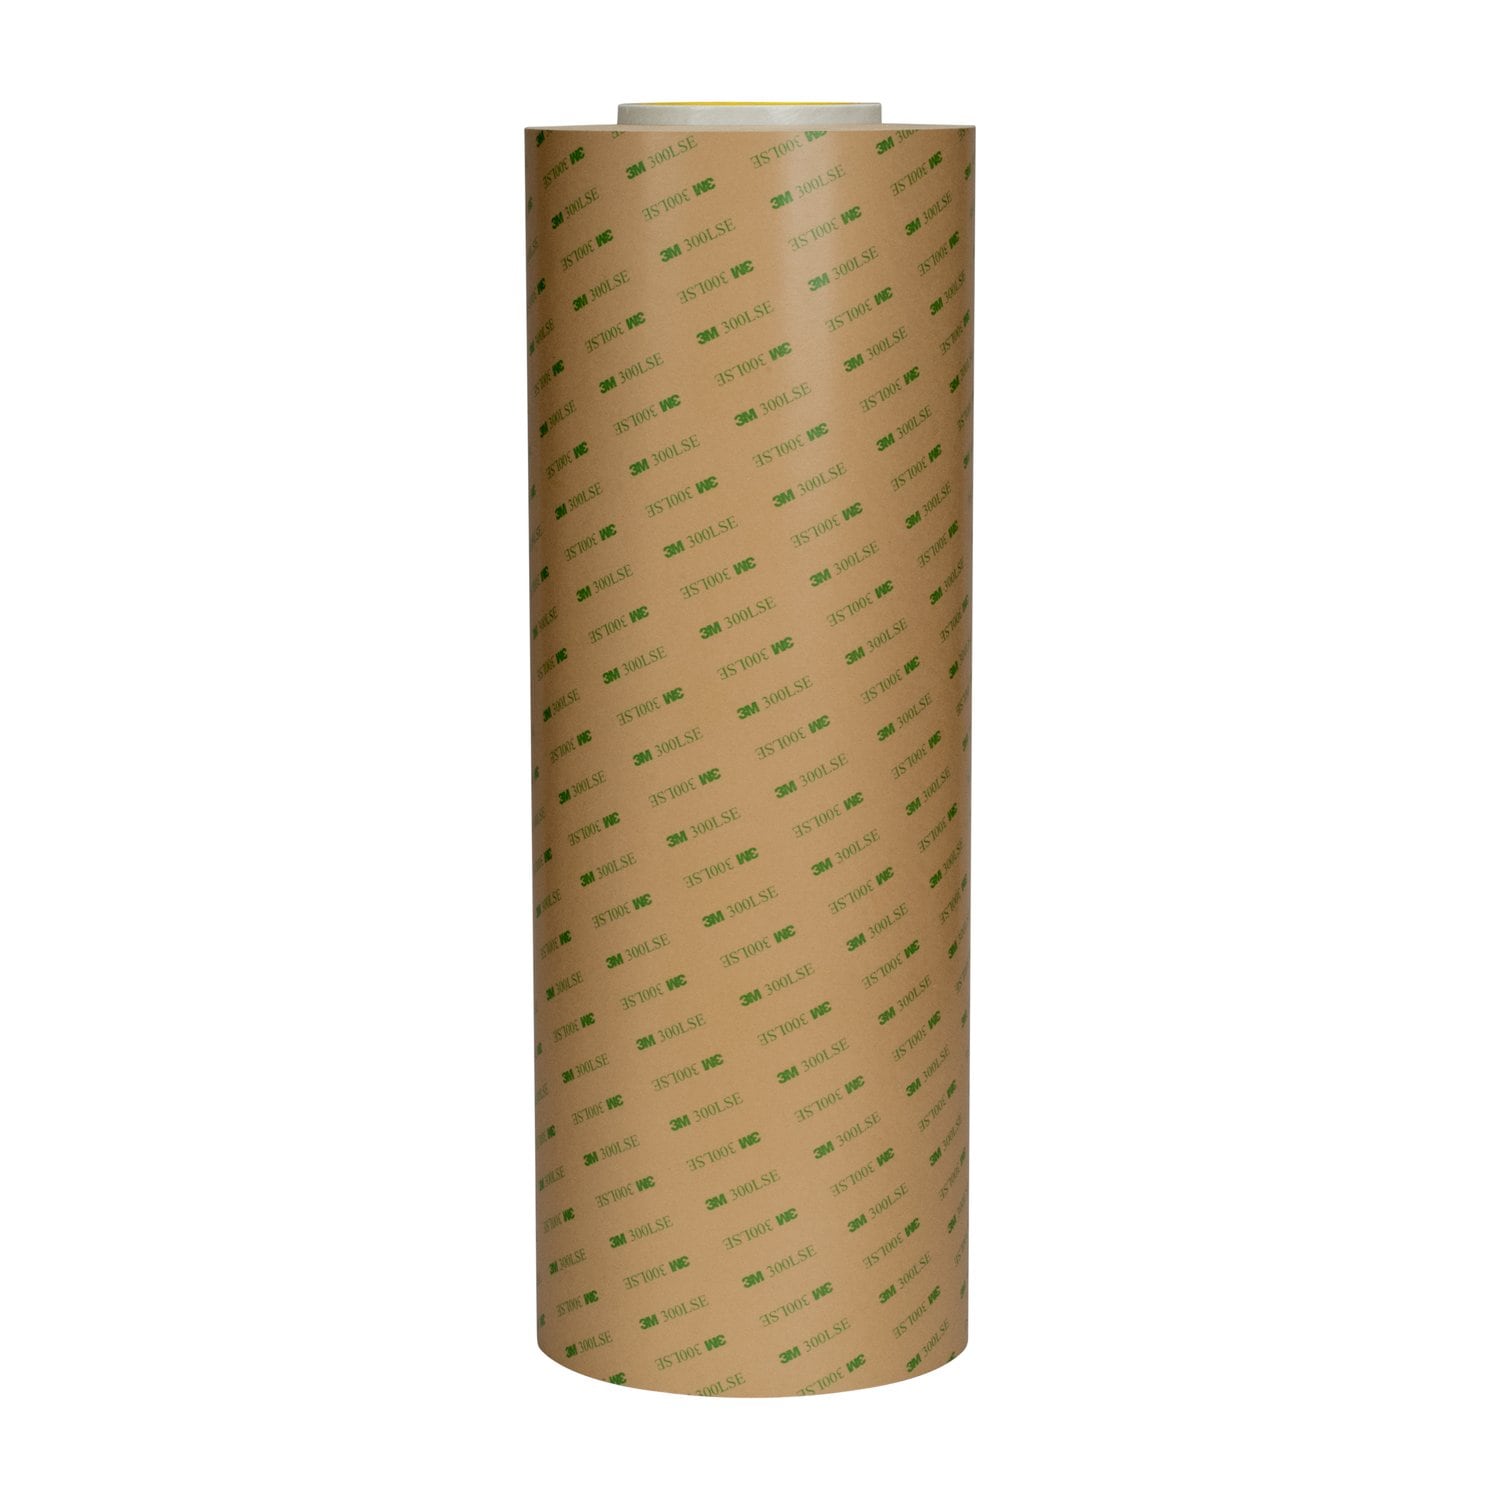 7000048663 - 3M Adhesive Transfer Tape 9671LE, Clear, 27 in x 180 yd, 2 mil, 1 roll
per case